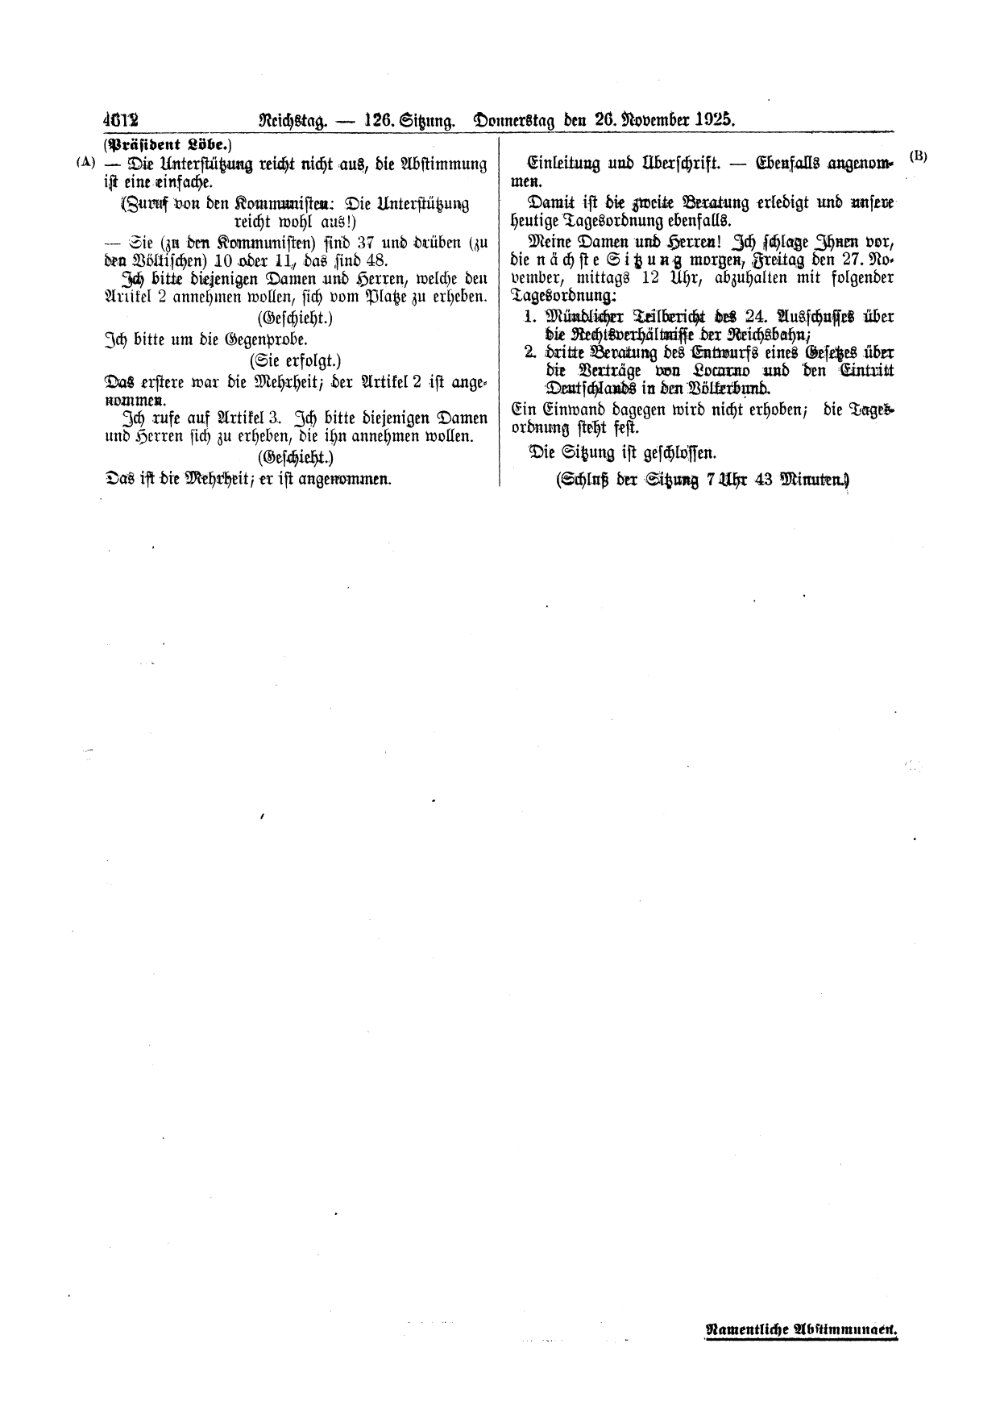 Scan of page 4612